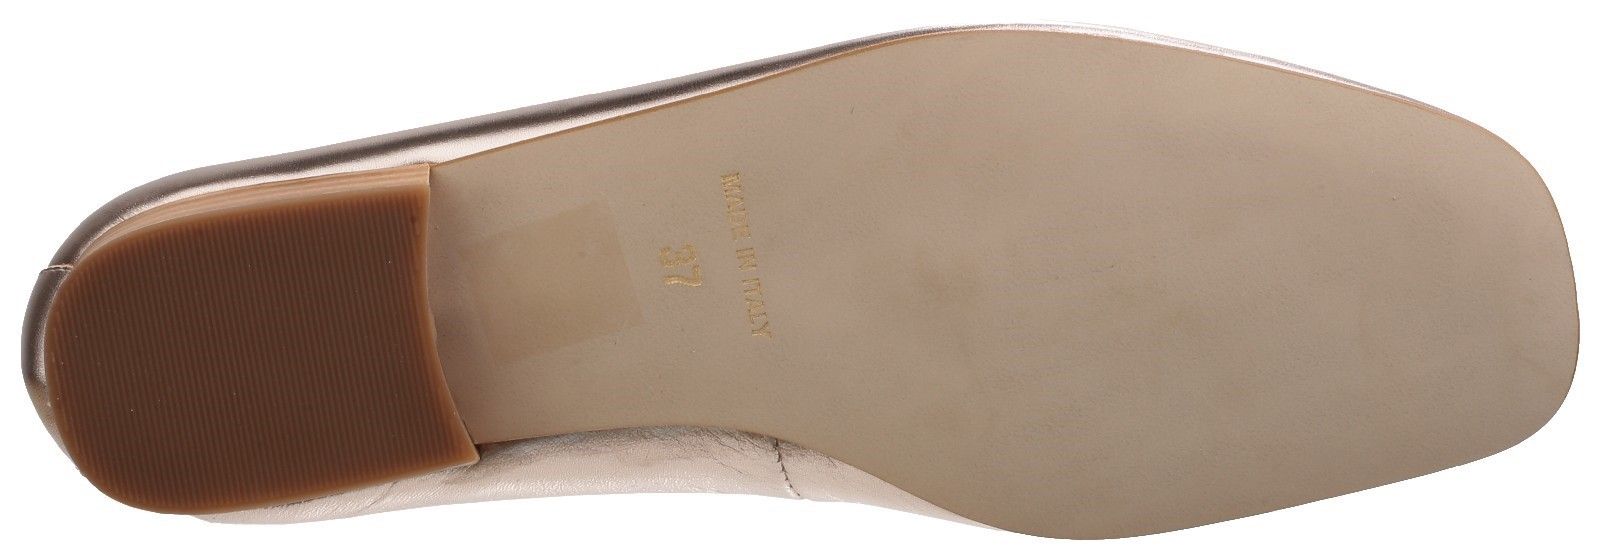 Riva Provence is an elegant ballerina with decorative bow detailing and square toe shape. Ideal wear for all occasions as can be easily dressed up or down. Provence is an elegant slip-on court shoe from 'Riva'. 
Crafted with a smooth leather upper finished with a simple bow and toggle feature. 
Sits on a low block heel.